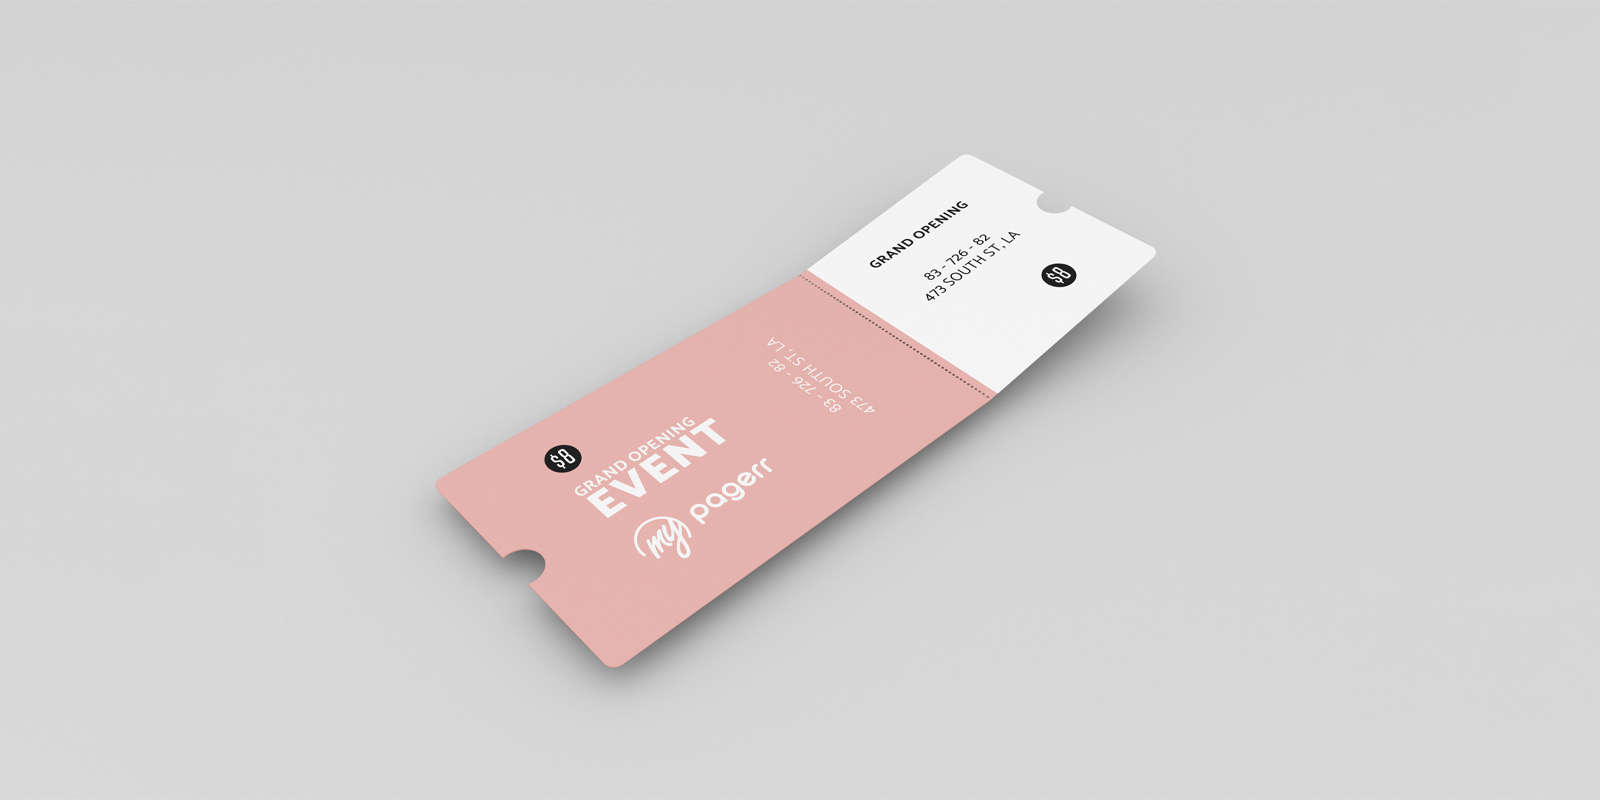 Tickets in Barcelona - Print with Pagerr